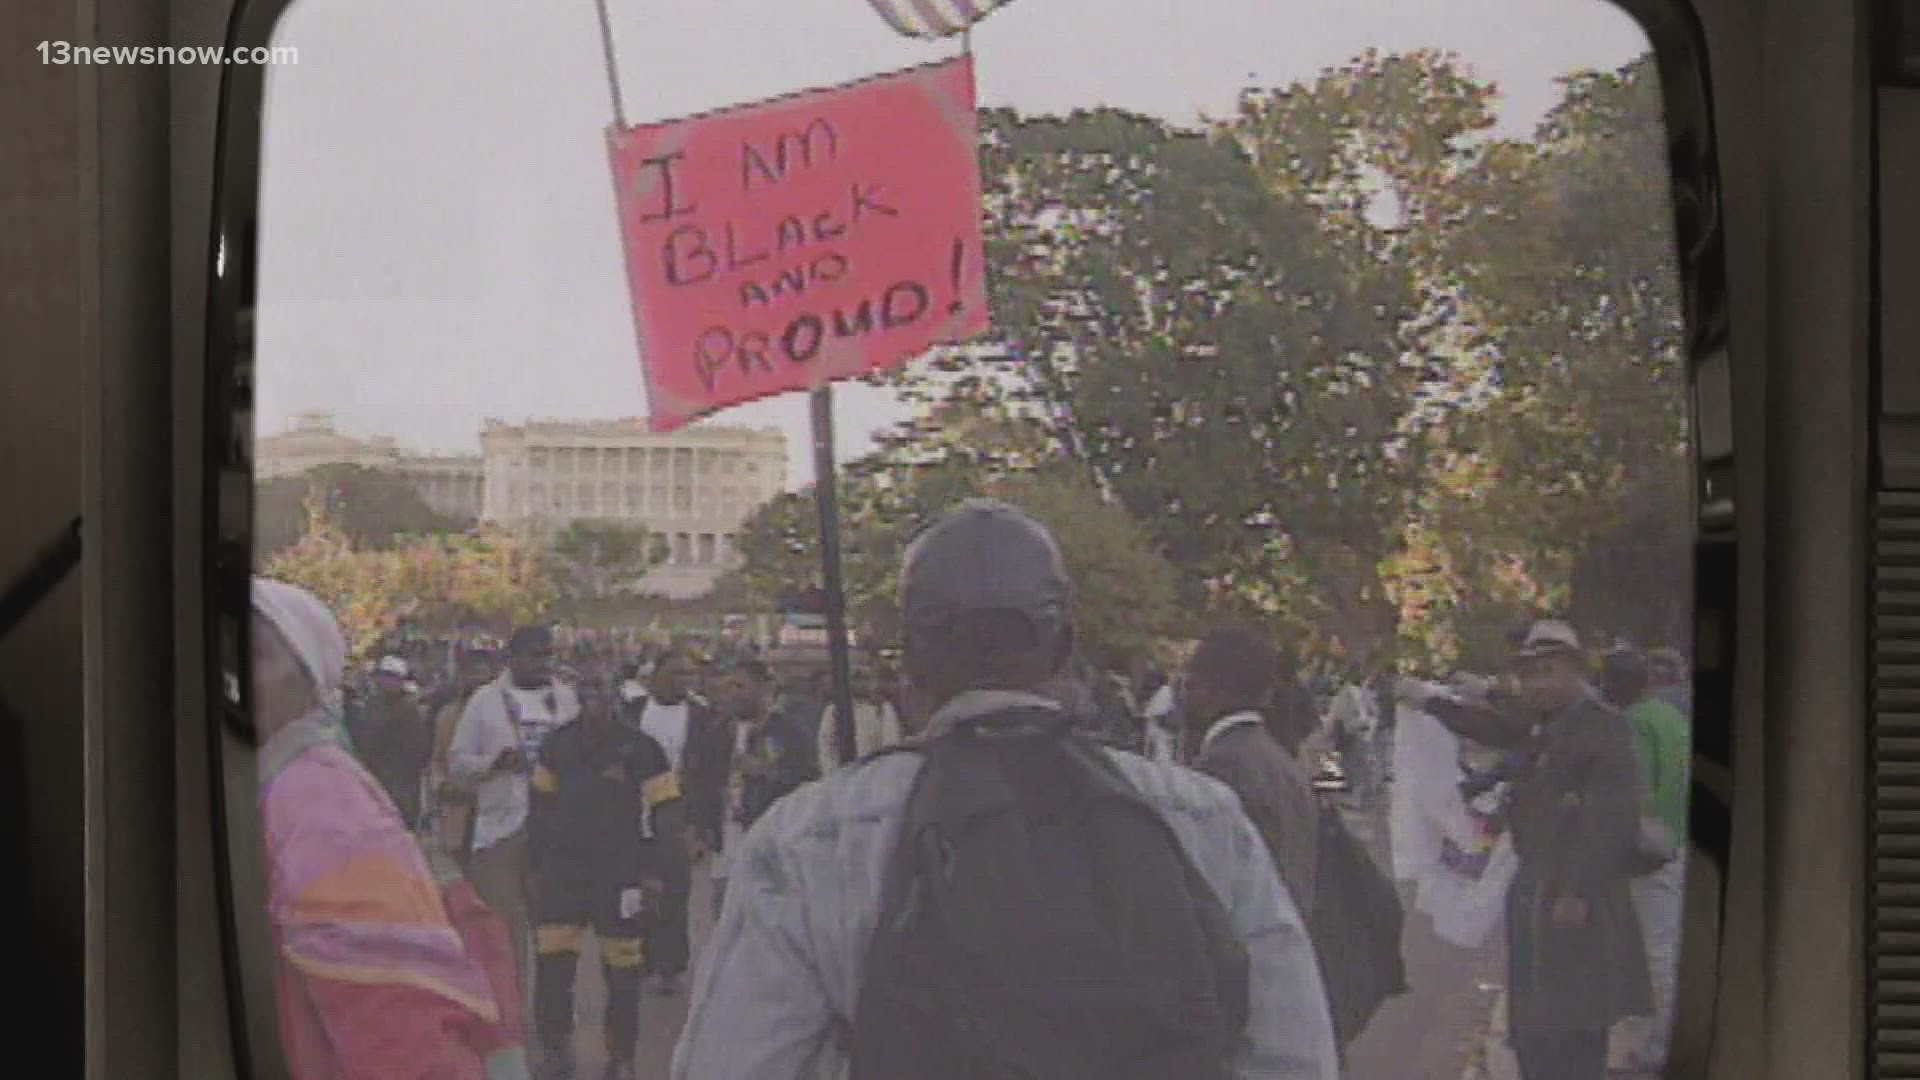 October will mark 27 years since demonstrators held the Million Man March.